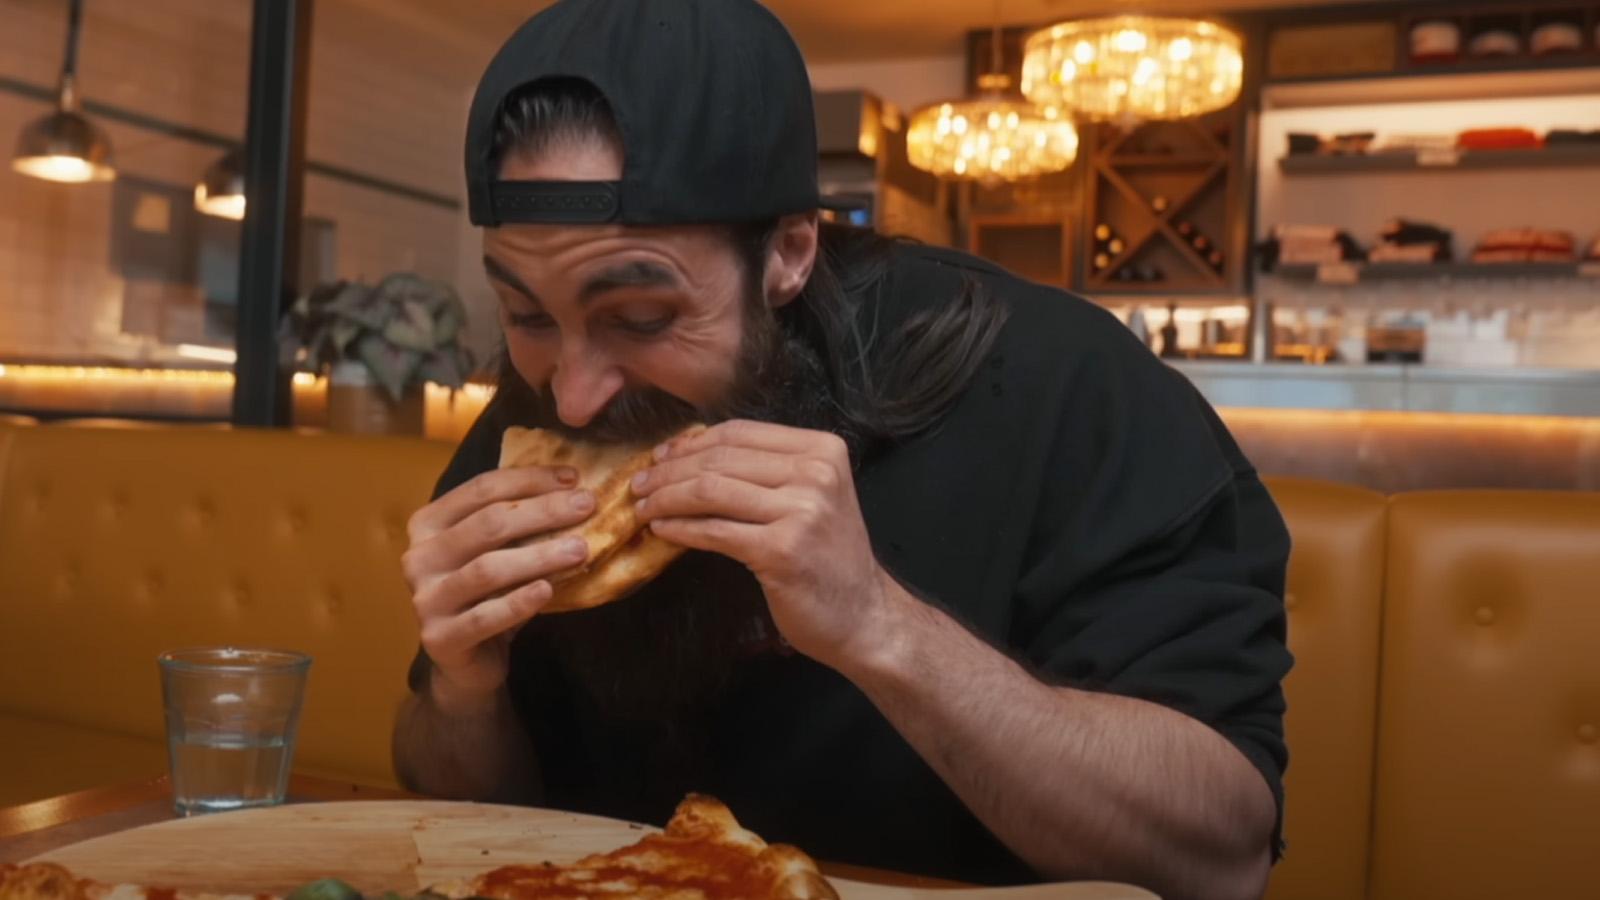 YouTuber beats record for most slices eaten at Gordon Ramsay’s bottomless pizza restaurant